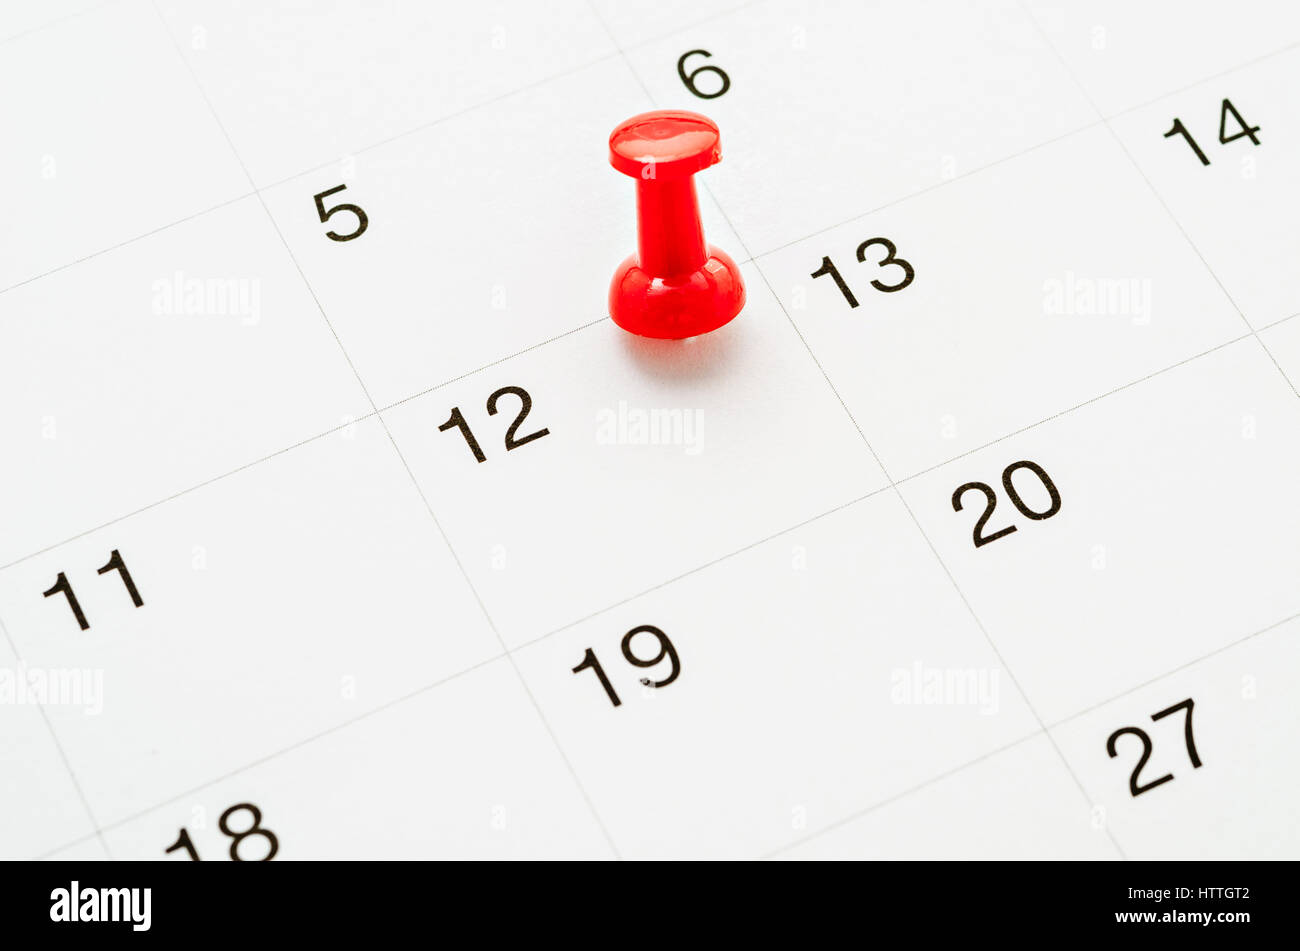 Red Thumb Tack on Calendar Page Stock Photo